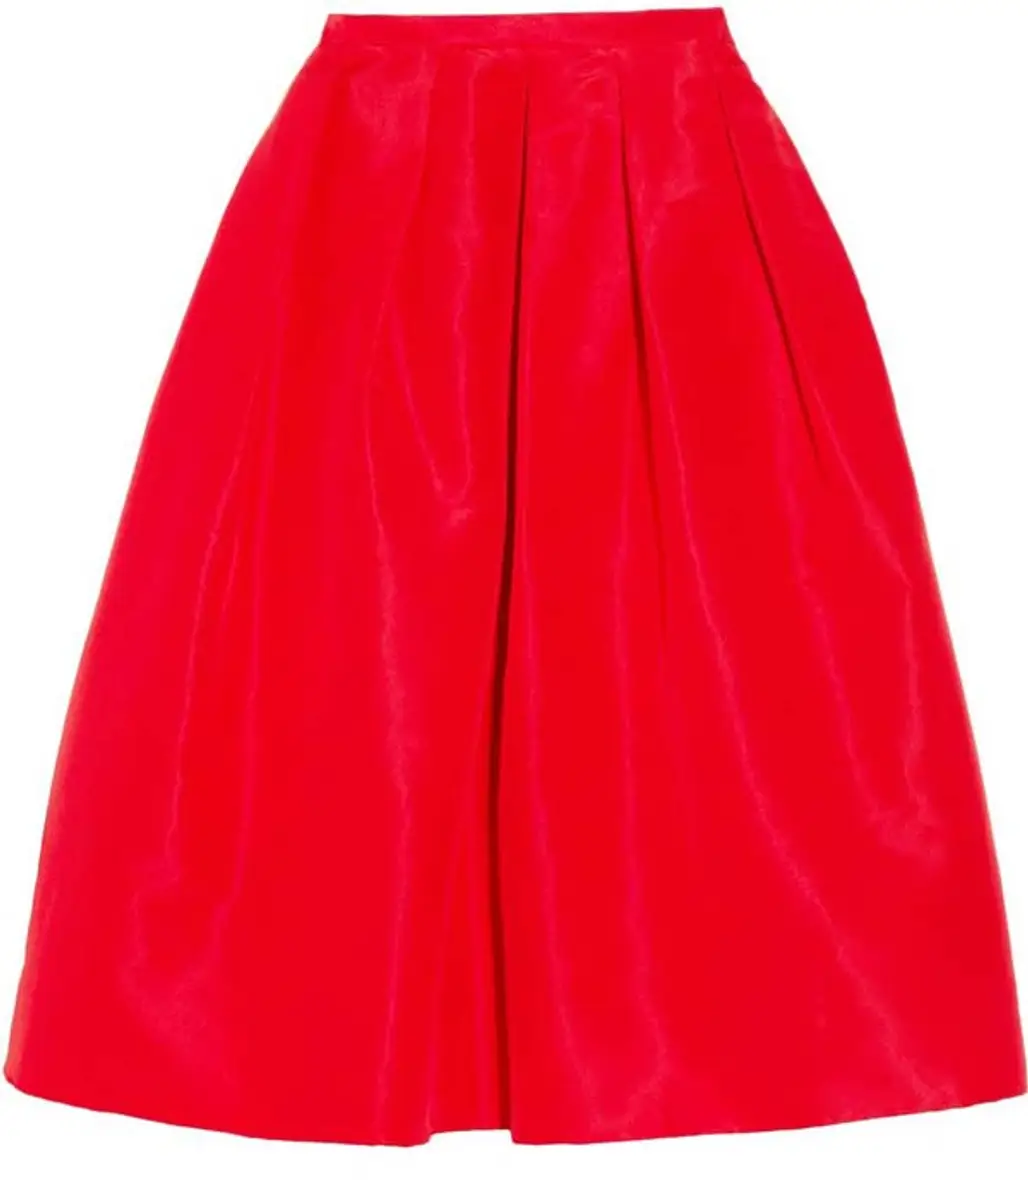 Red Party Skirt